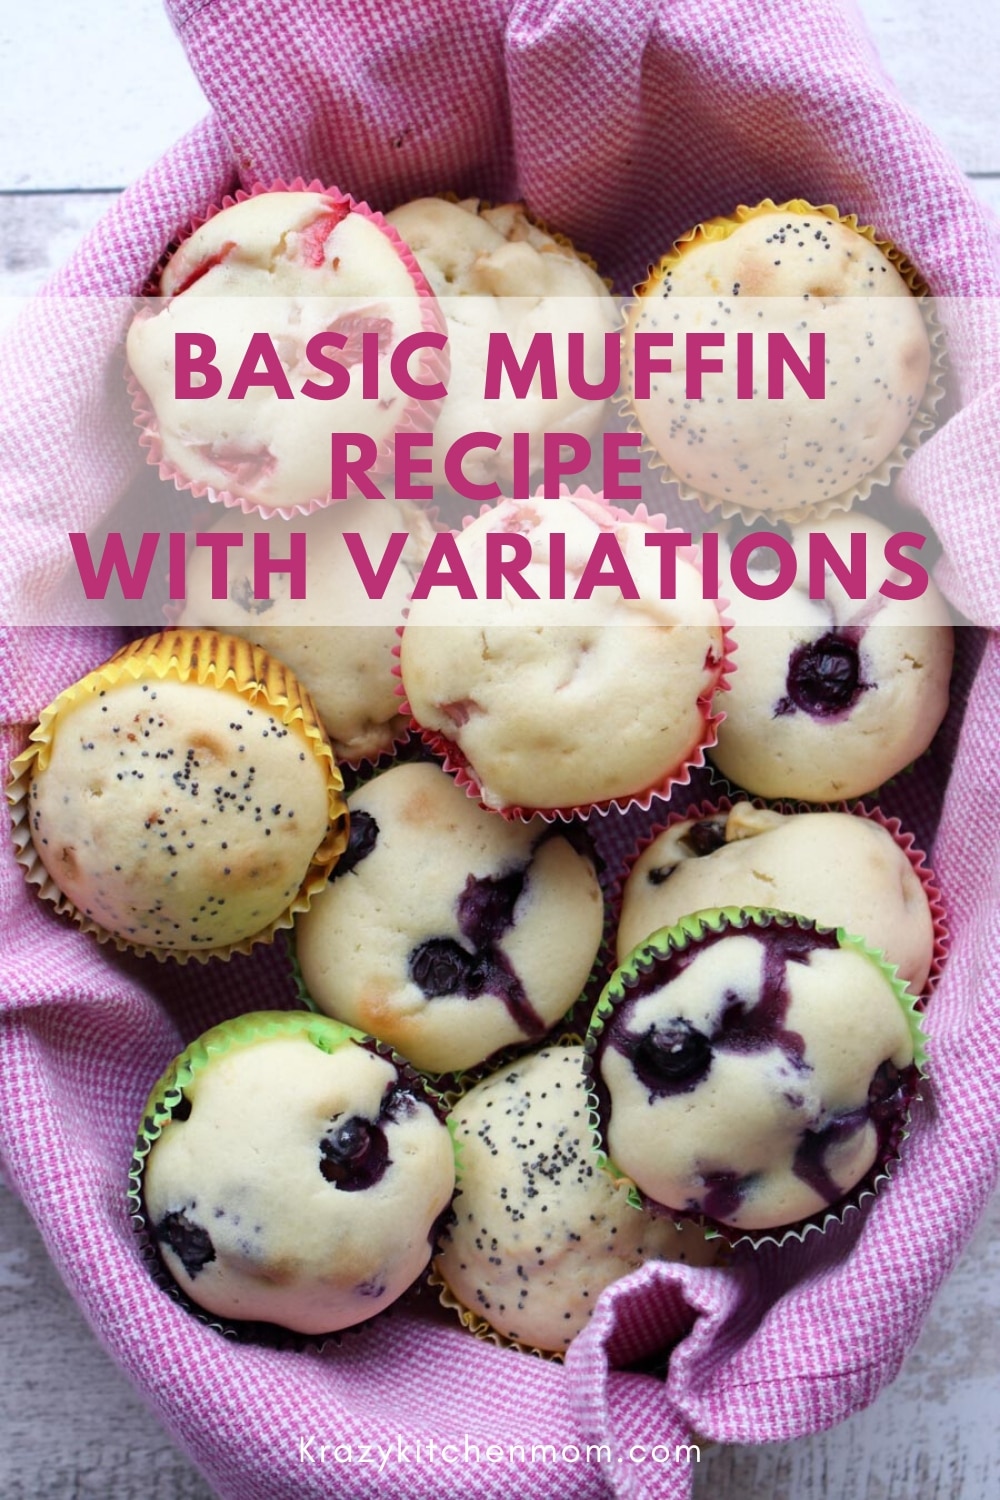 Start with this Basic Muffin Recipe to make many variations and flavors of muffins. This simple recipe allows you to add many different fruits and flavors to create mouthwatering muffins.  via @krazykitchenmom